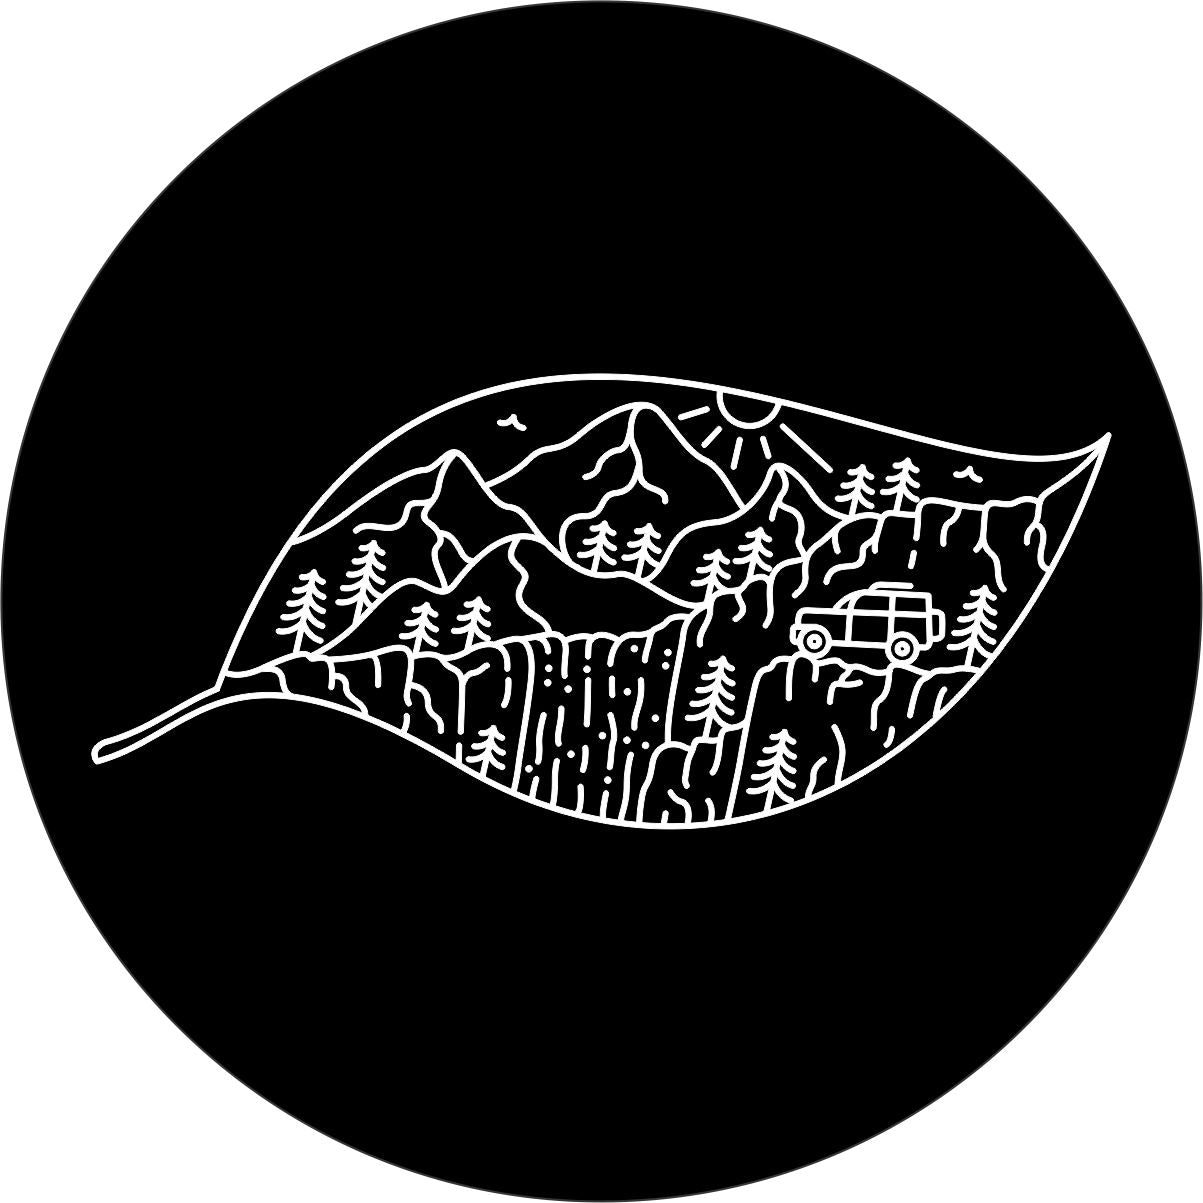 Creative spare tire cover design of a leaf outline and filled with hand drawn mountains and an exploring SUV. 